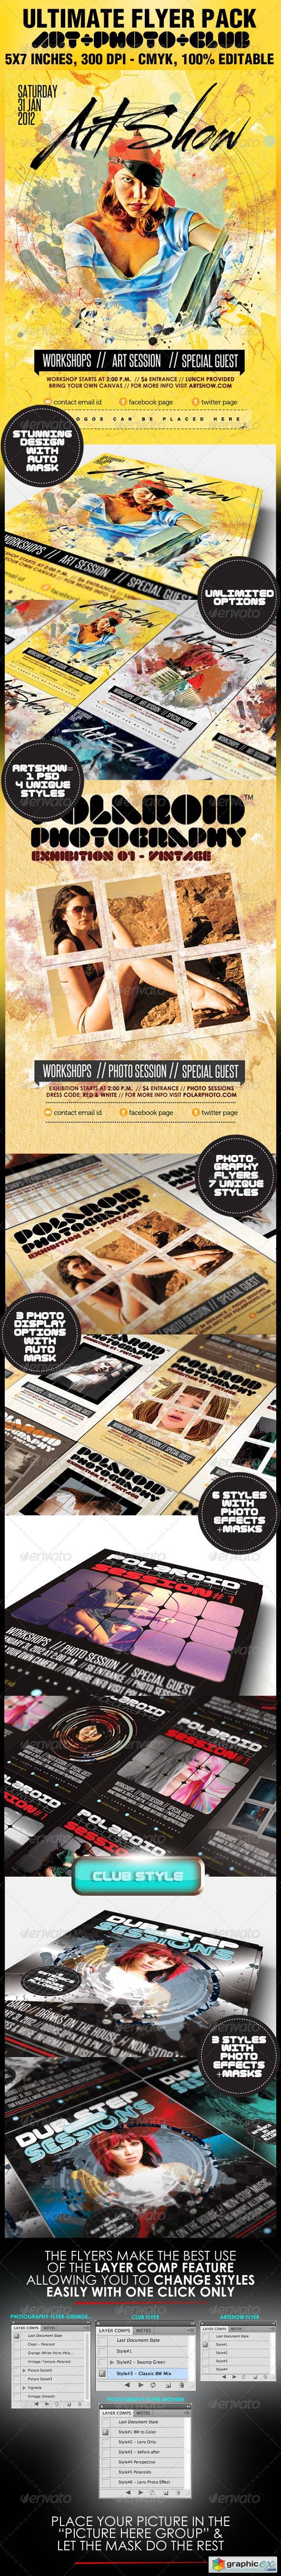 Art Photography & Club Flyers - The Ultimate Pack